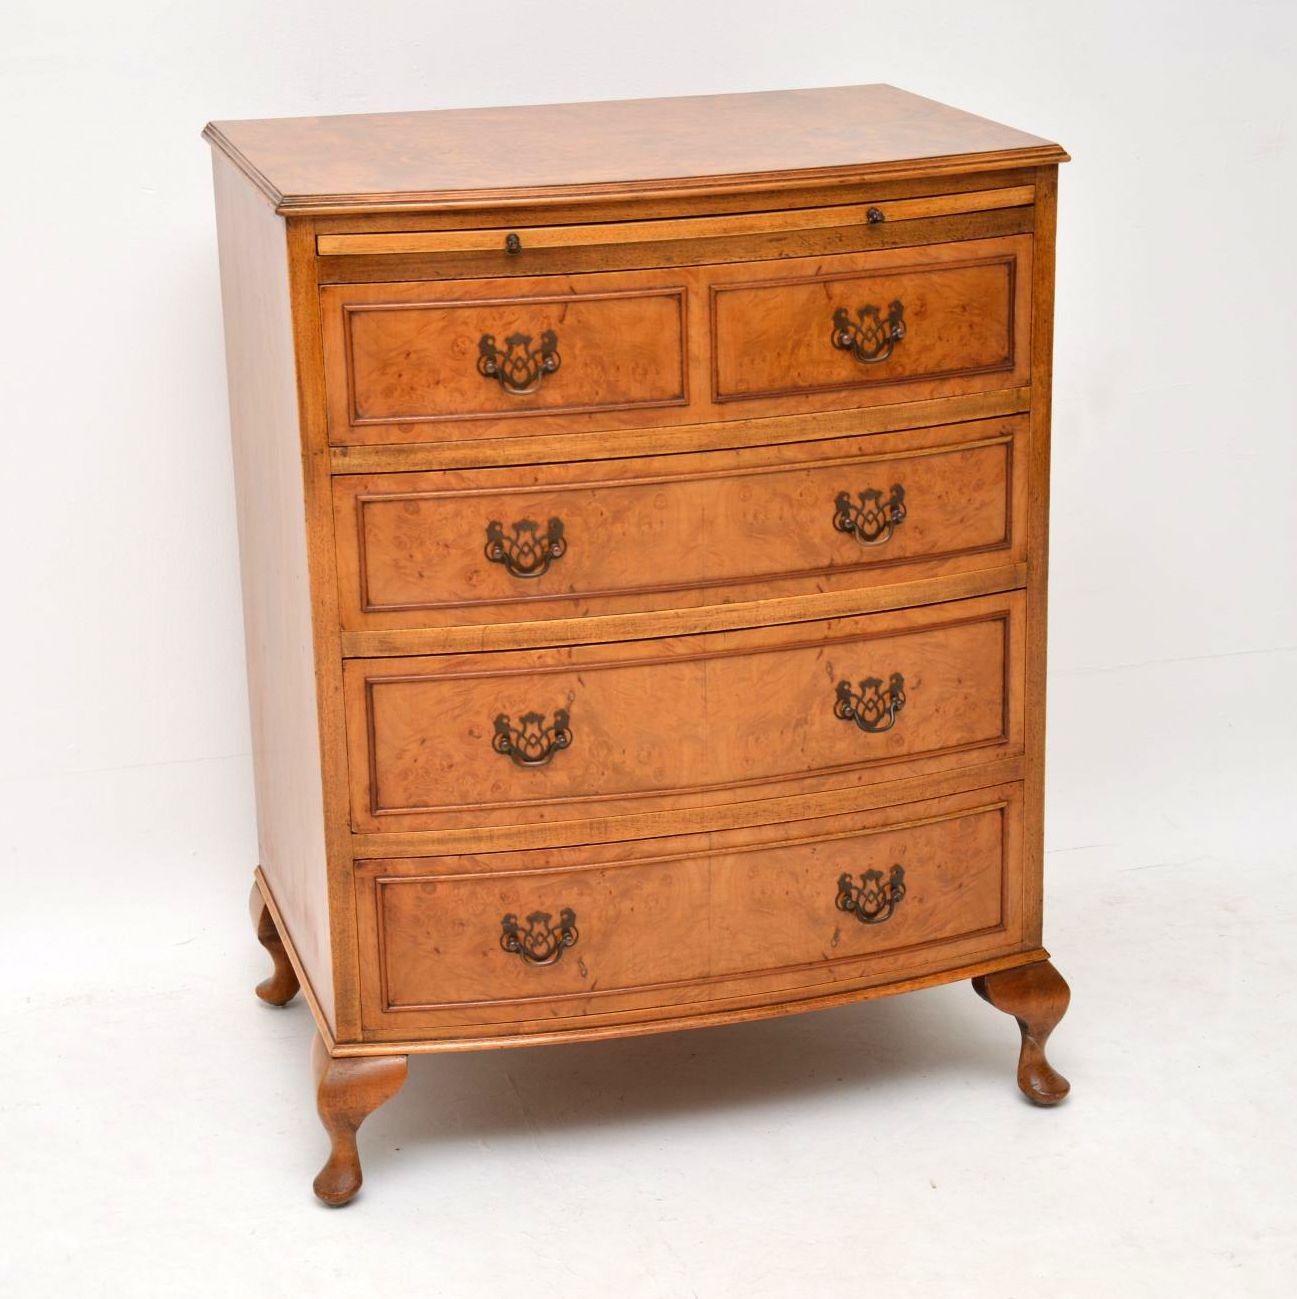 Small antique burr walnut bow fronted chest of drawer on Queen Anne feet and with a brushing slide at the top. It’s a lovely pale color and is in excellent condition, having just been French polished. The top and drawer fronts are burr walnut and